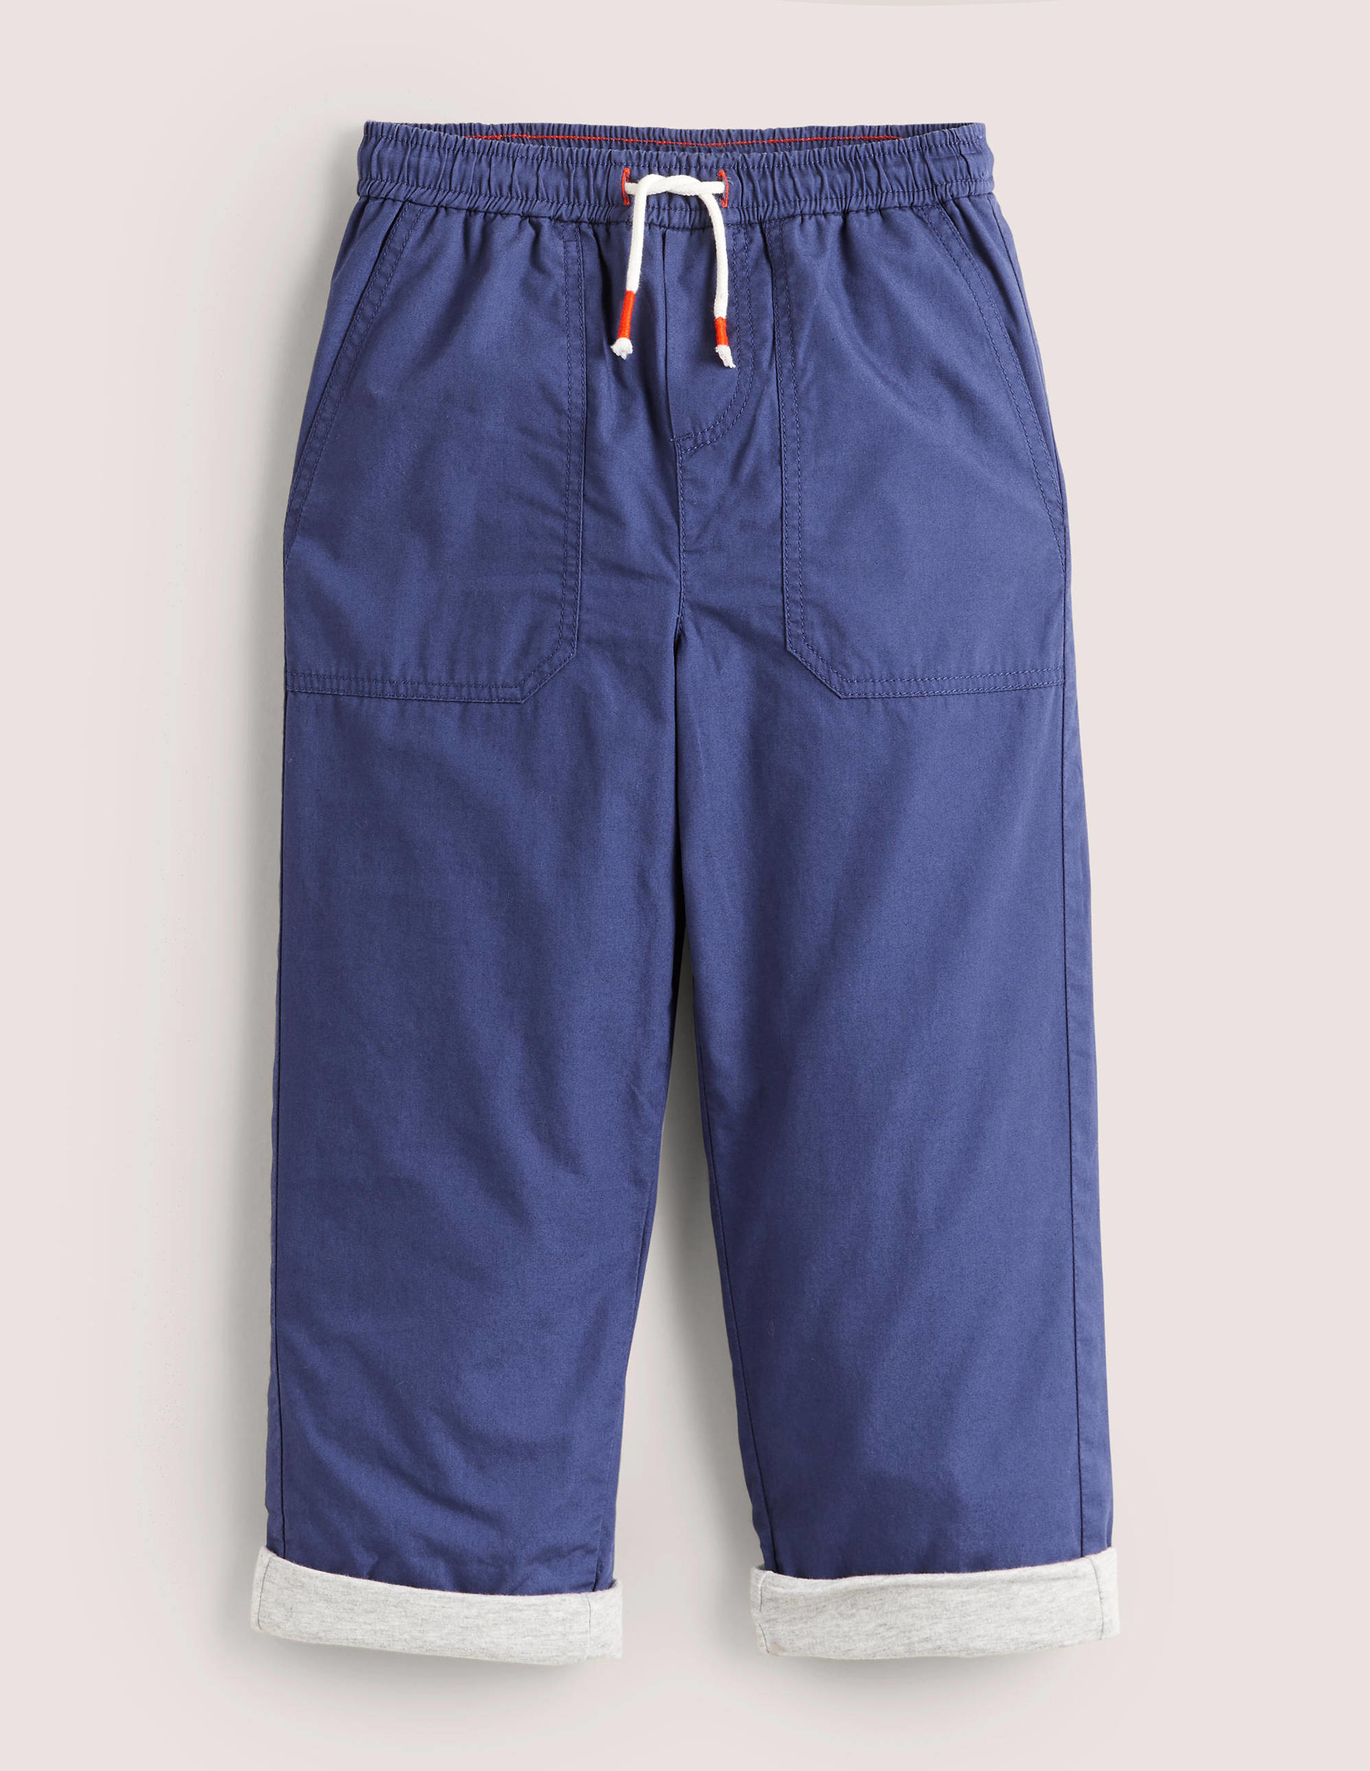 Boden Lined Cord Pants - Starboard Blue